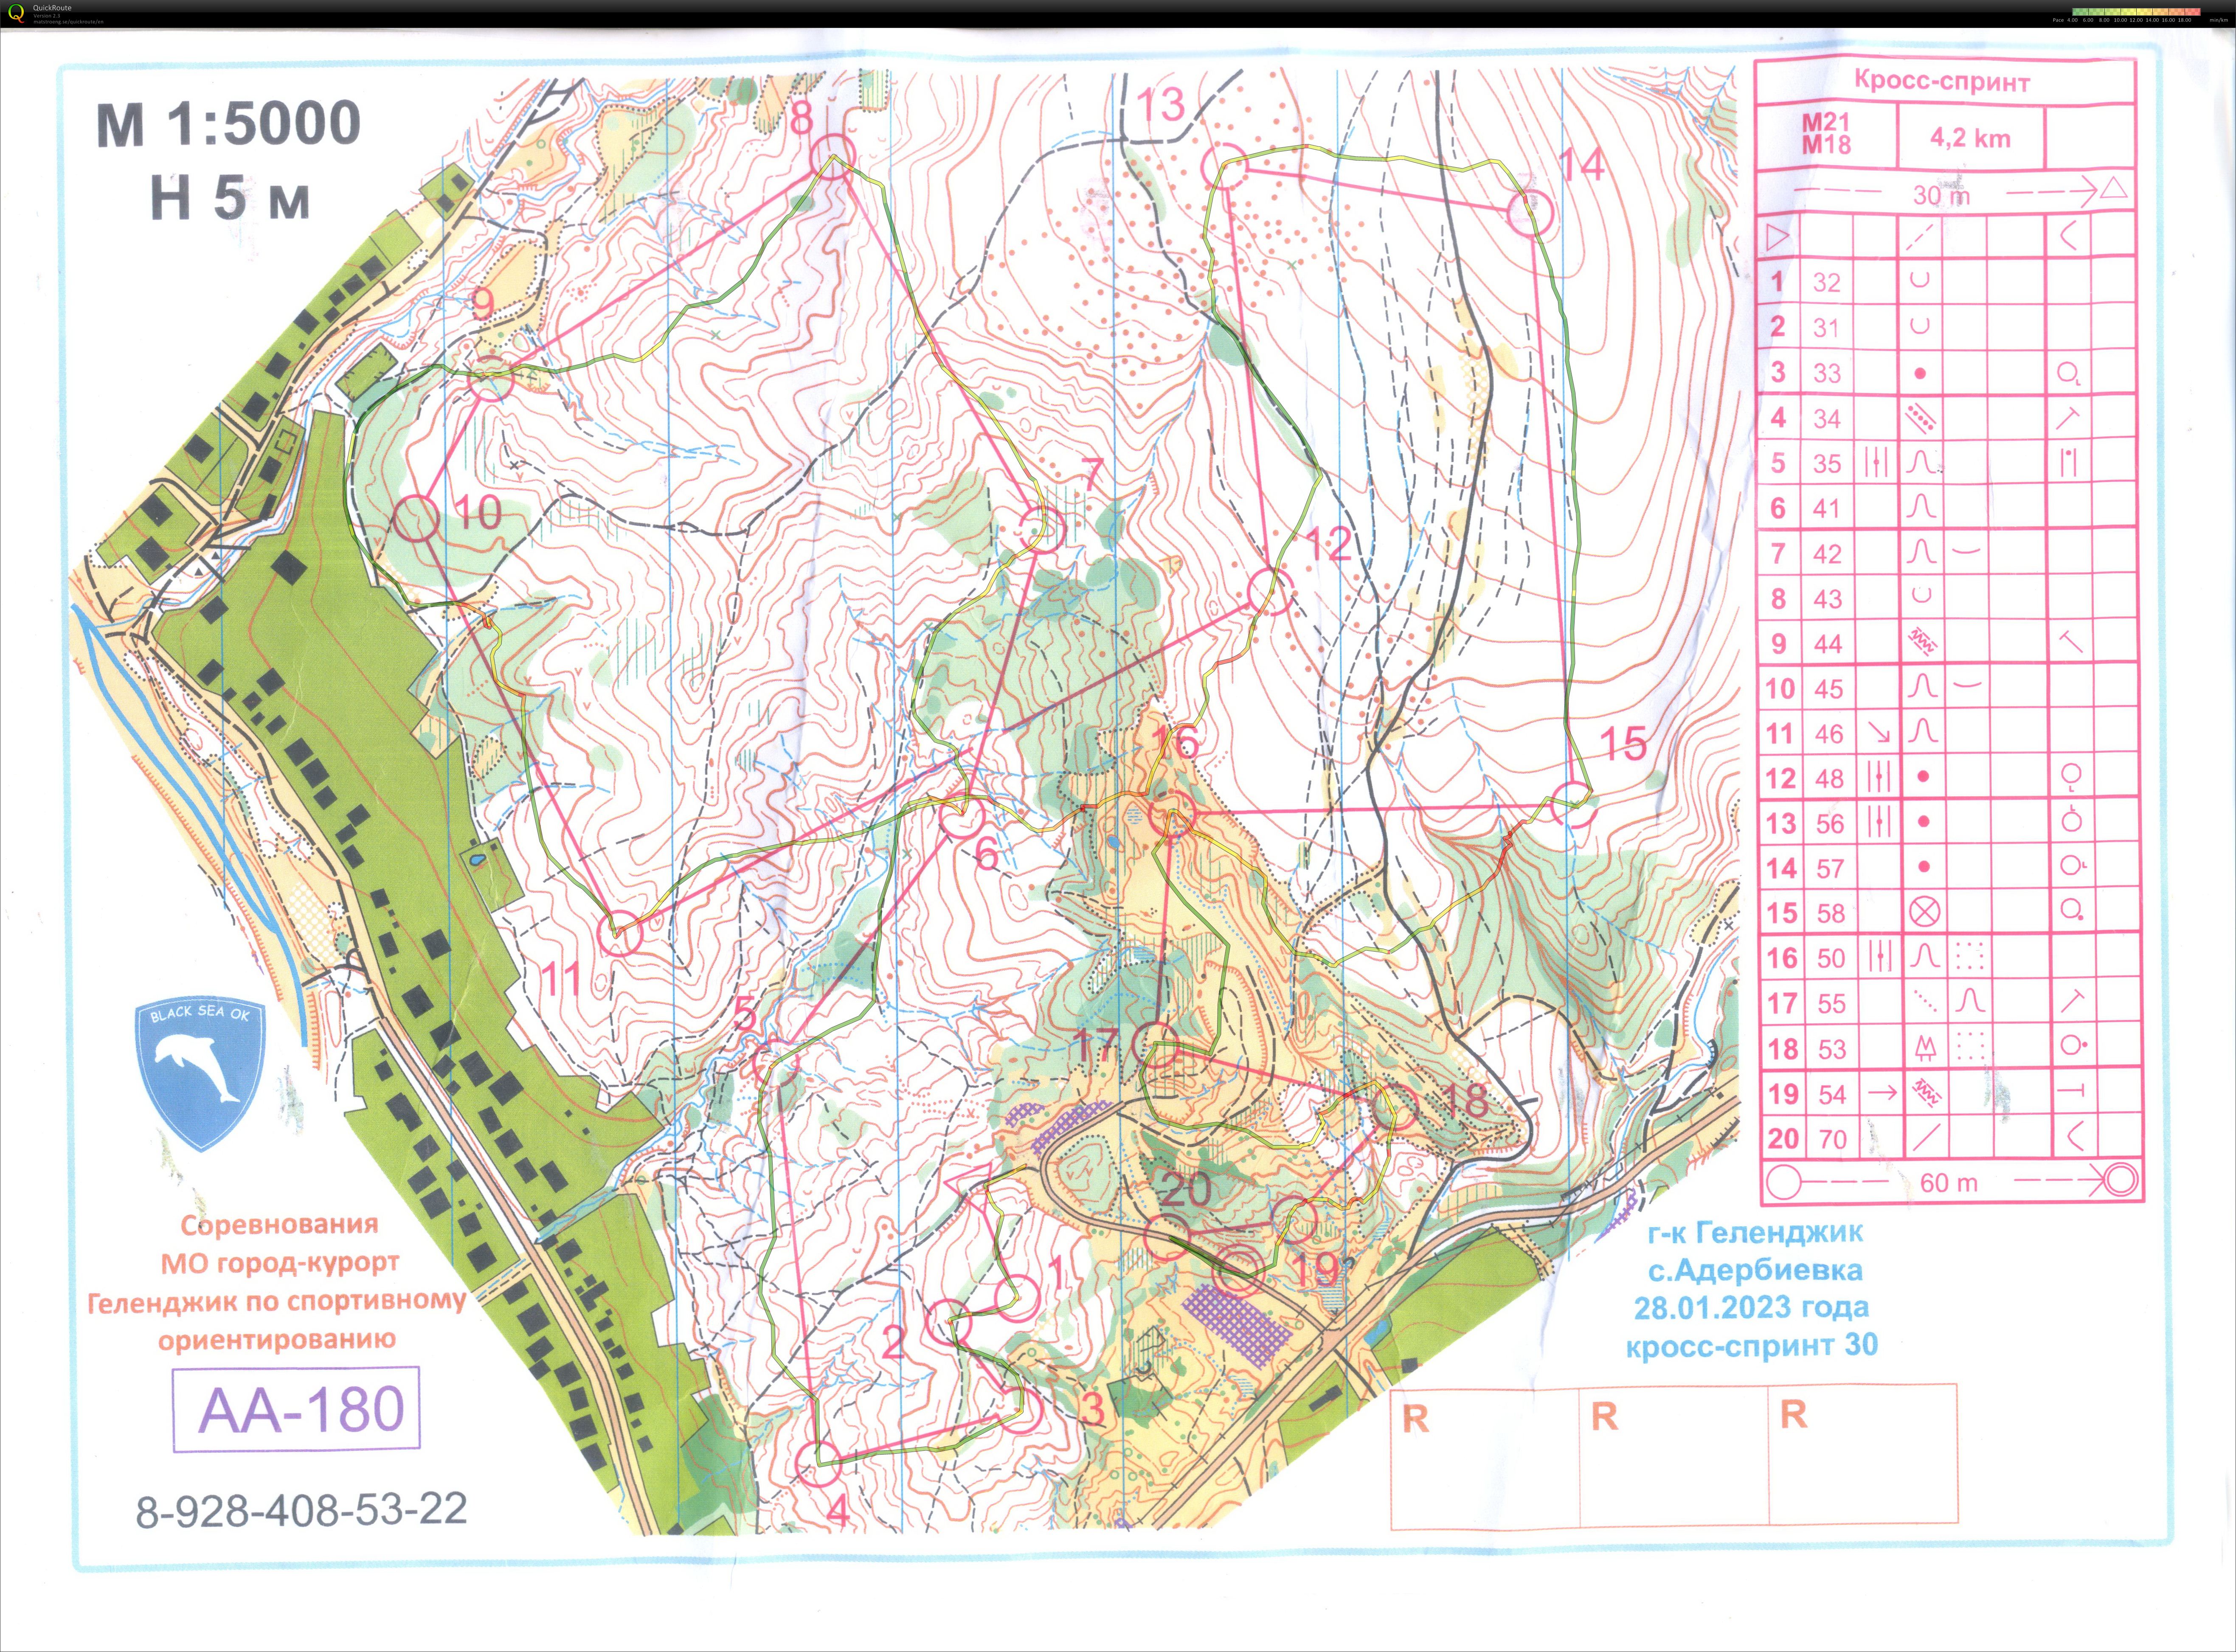 Map with track - Чемпионат г. Геленджик. Кросс-спринт, area - , from orienteering map archive of Artem Tsvetkov